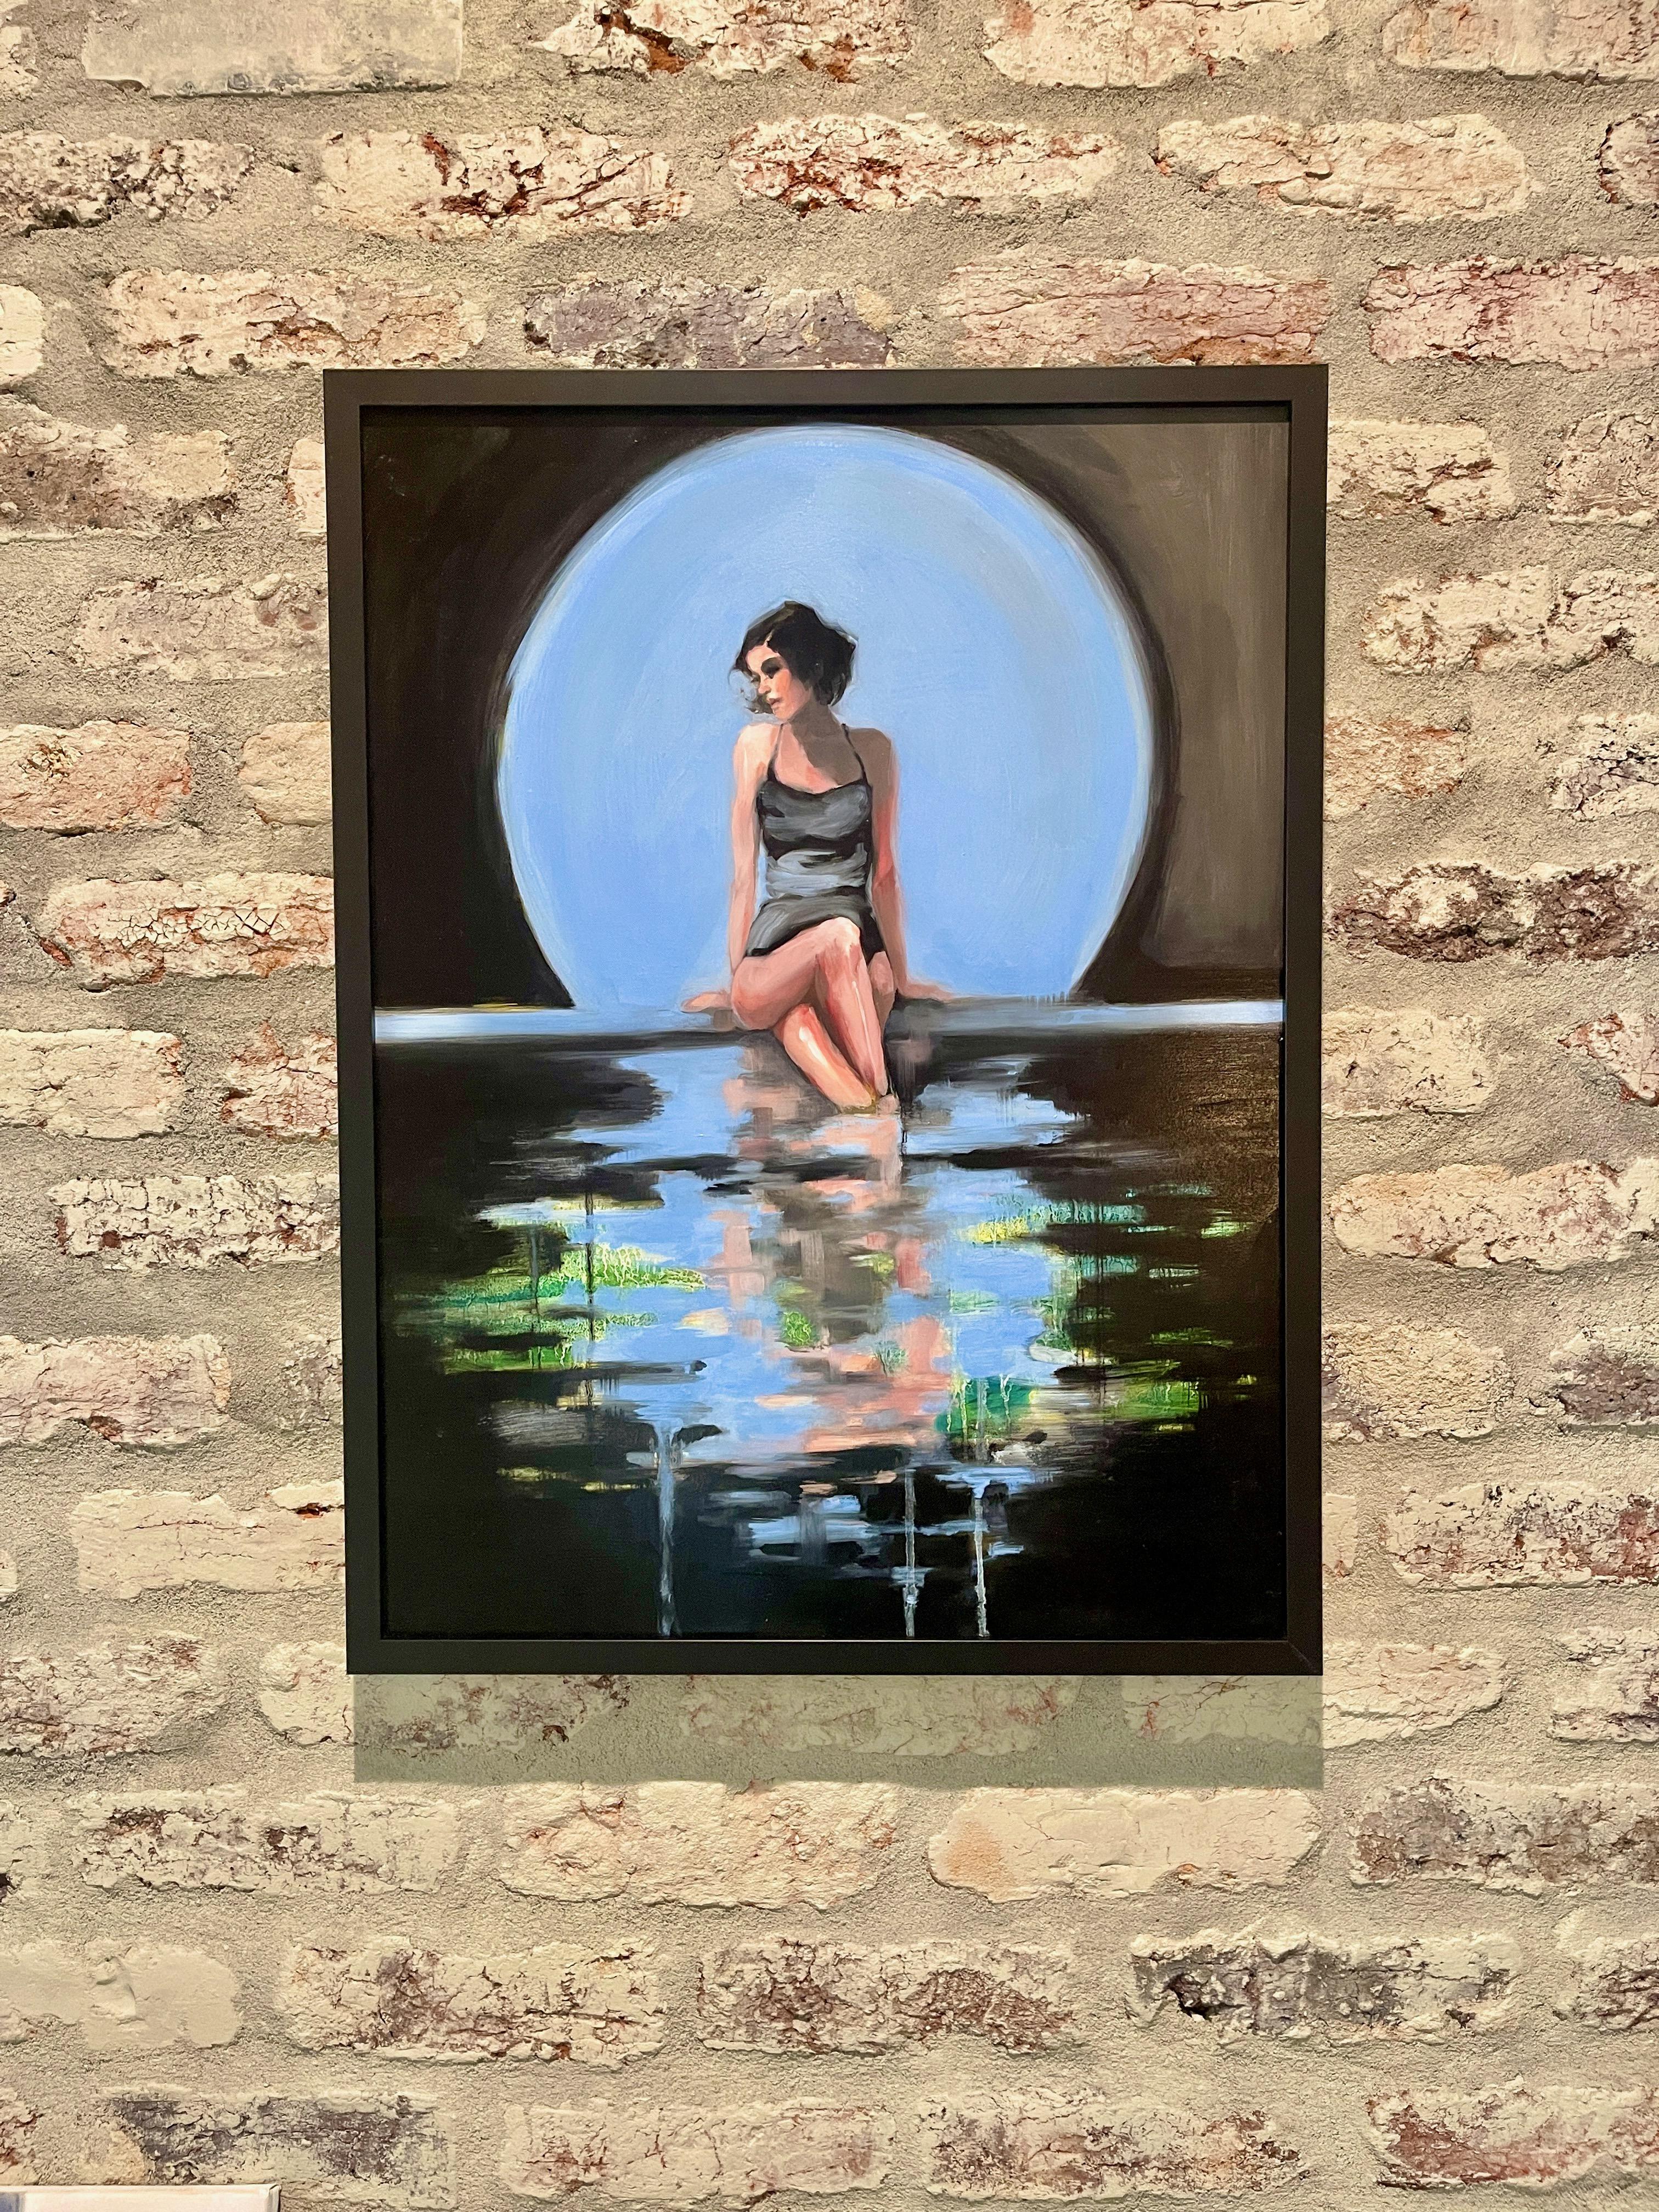 <p>Artist Comments<br>A woman sits at the edge of a pool, with the blue moon framing her and adding to the contemplative atmosphere of the scene. The layers of paint on the water reveal the several color transformations of the background before